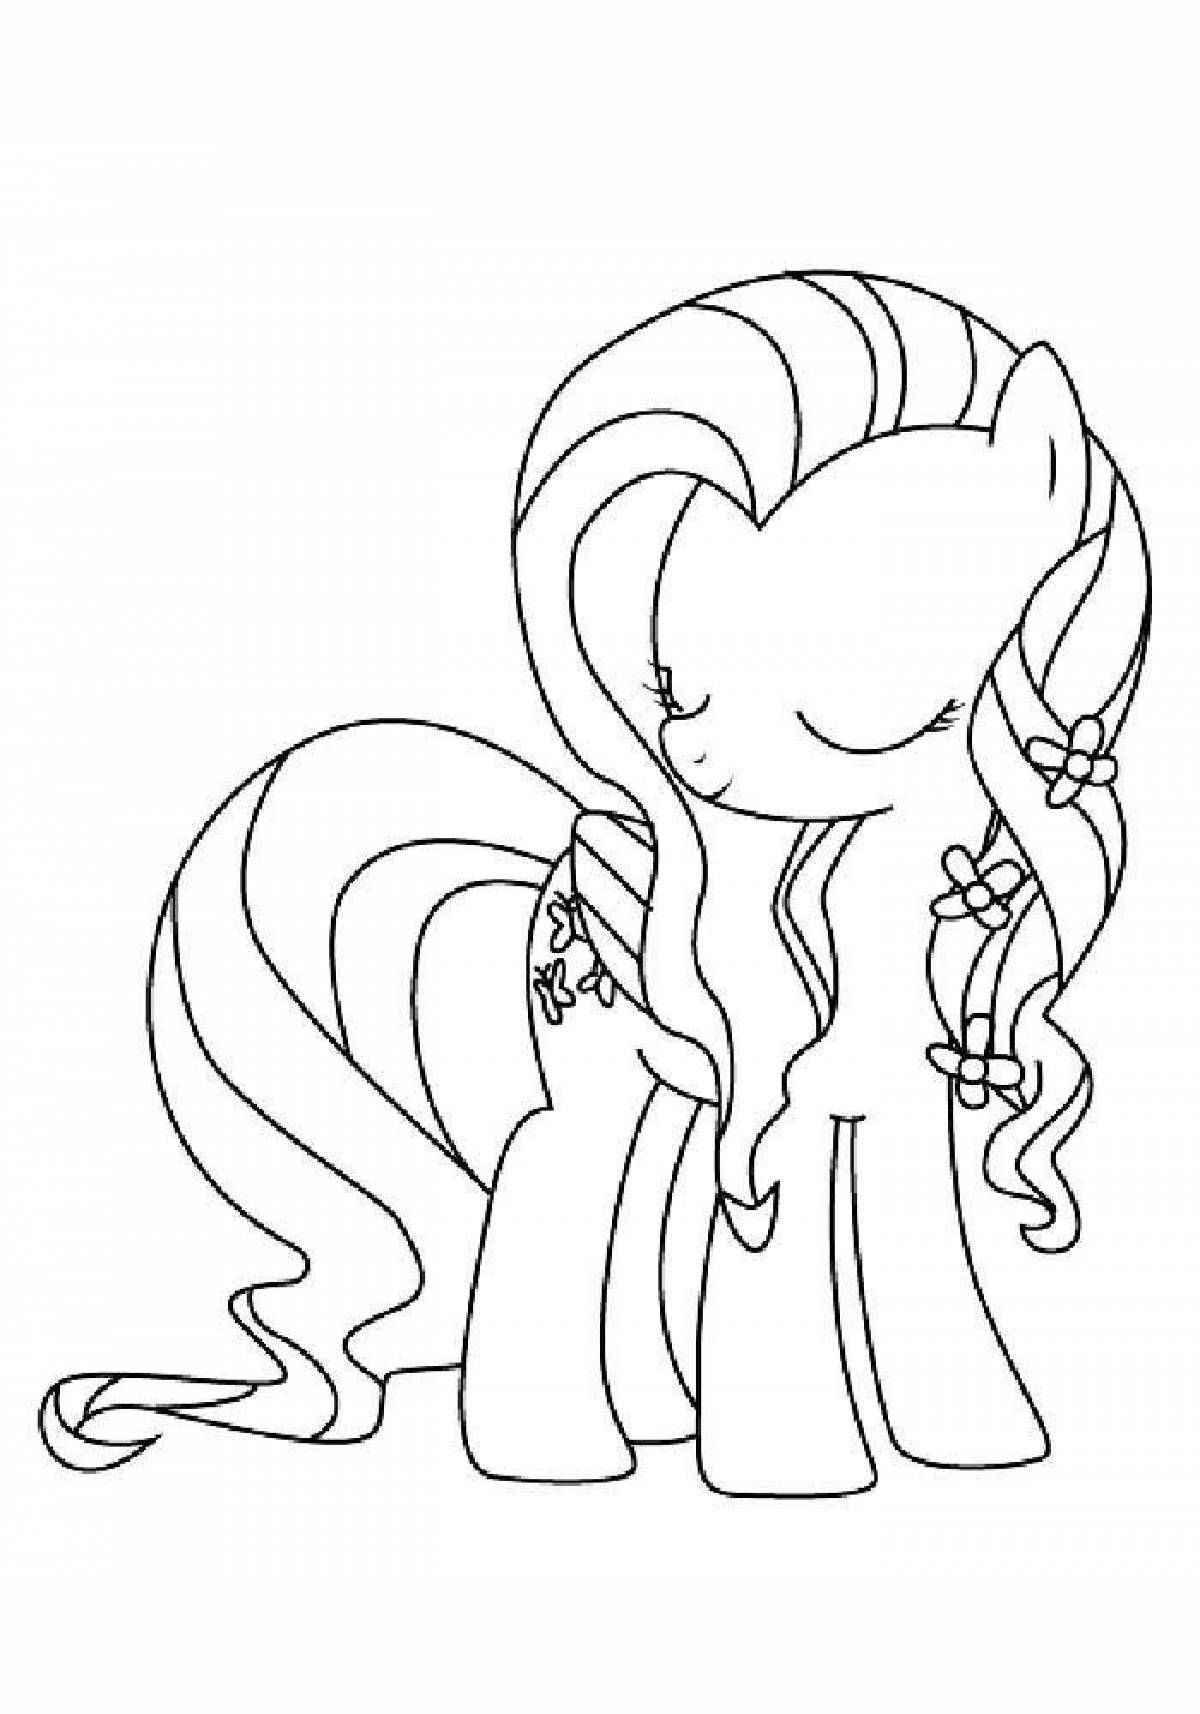 Coloring page happy fluttershy pony